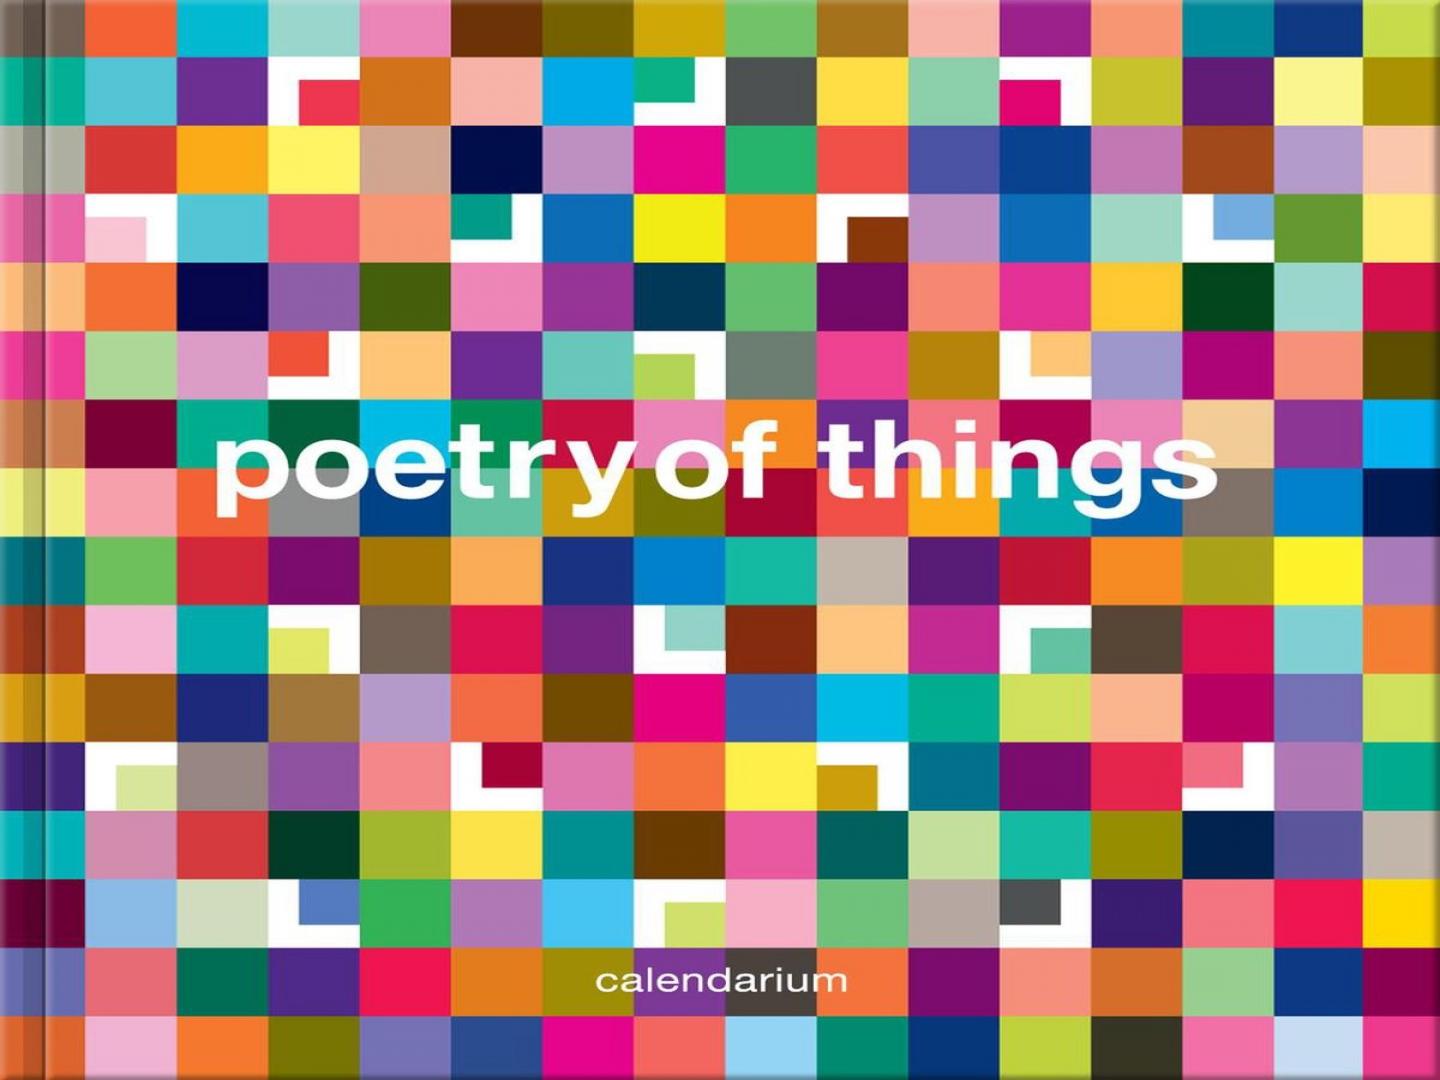 Ham, Coen van - Poetry of things - A poem for every day of the year